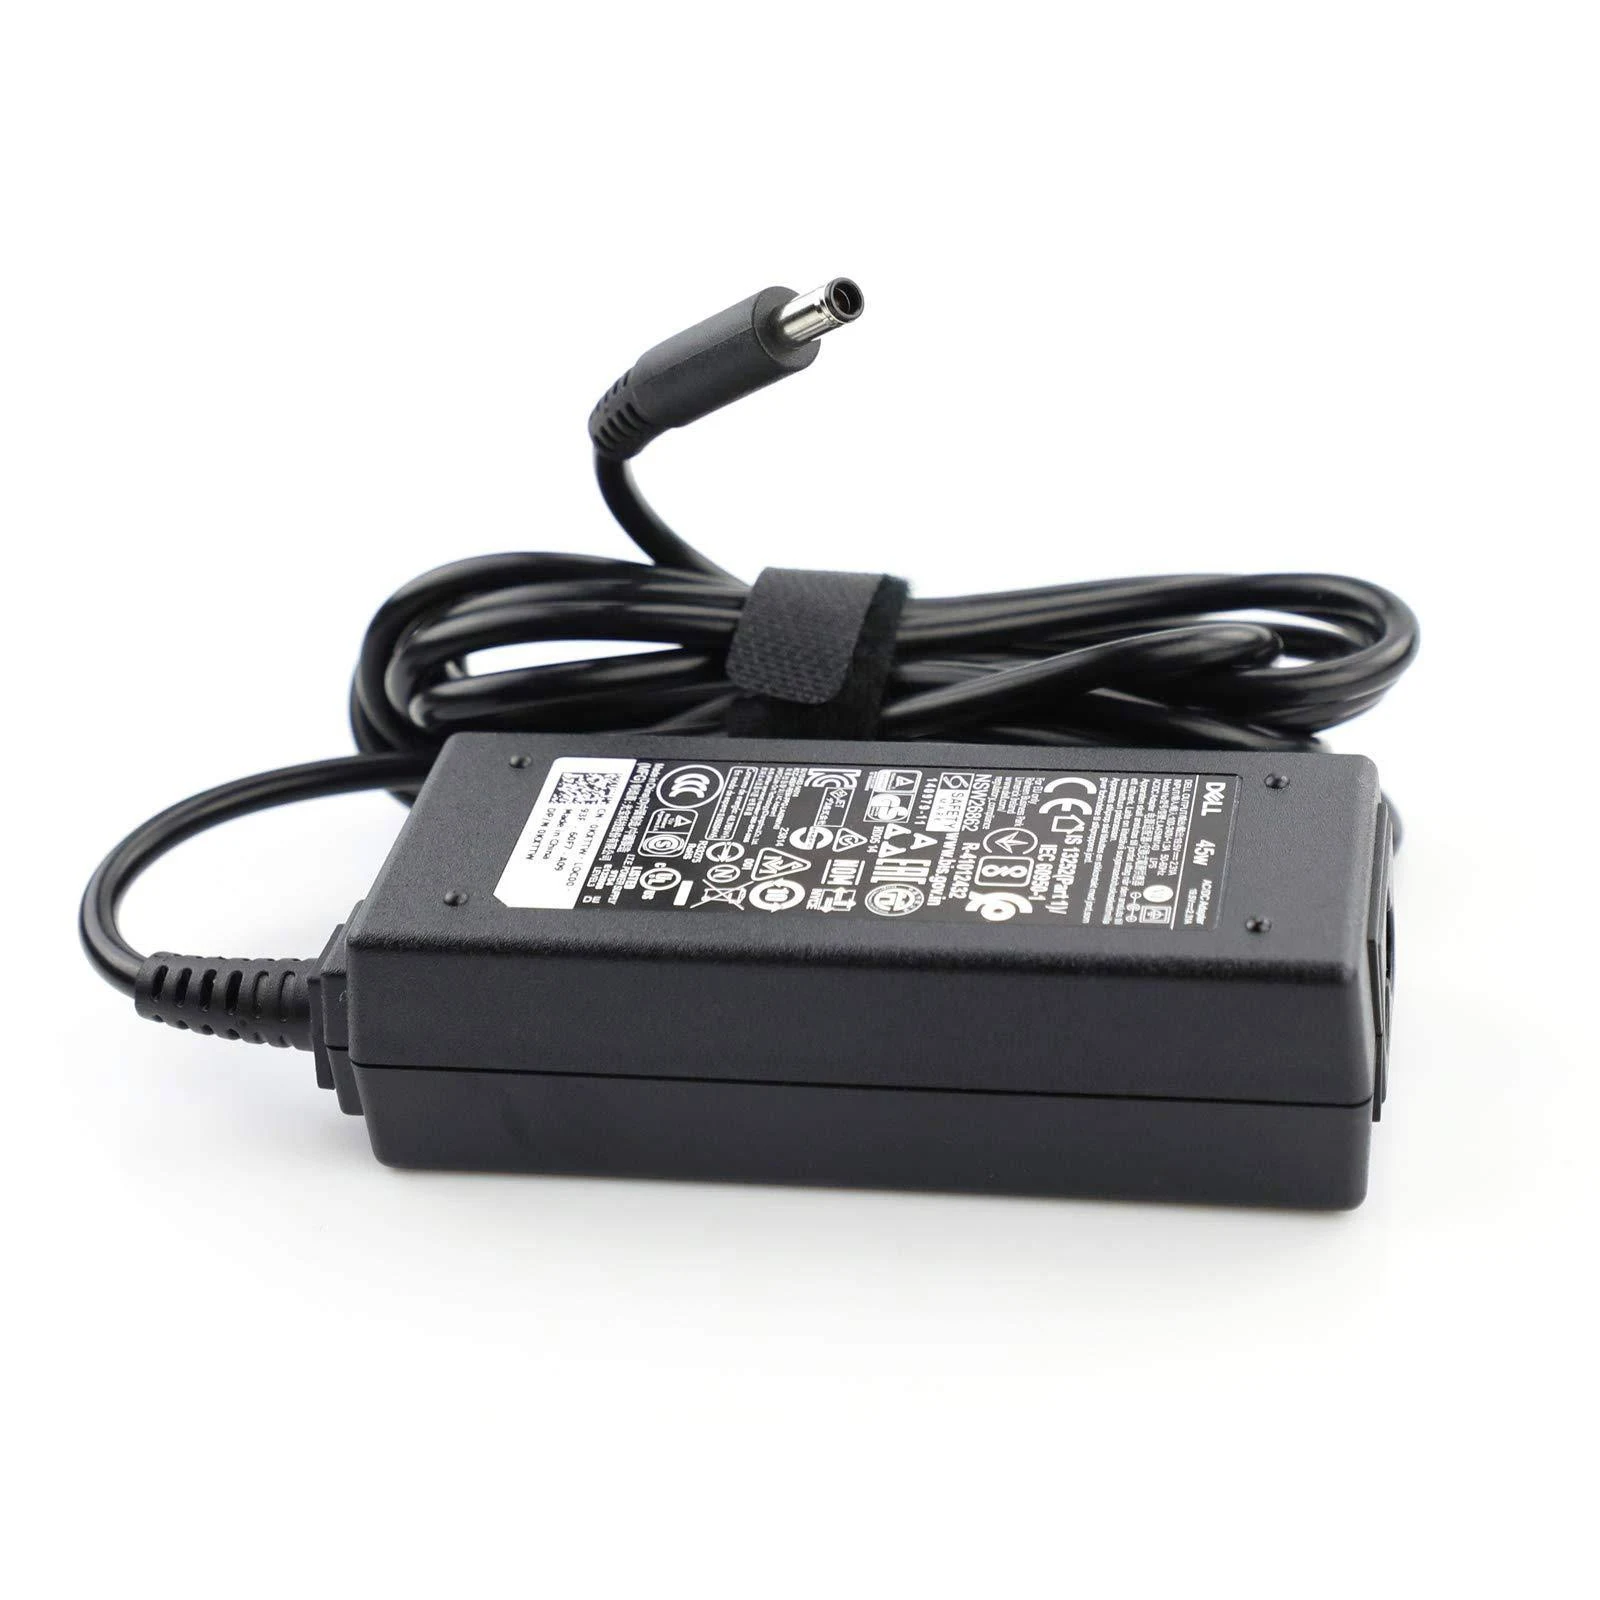 DELL Part  Original DELL 45W AC Adapter, Charger, 4.5mm, World Wide (Includes 0.5m Power Cord) [0KXTTW]